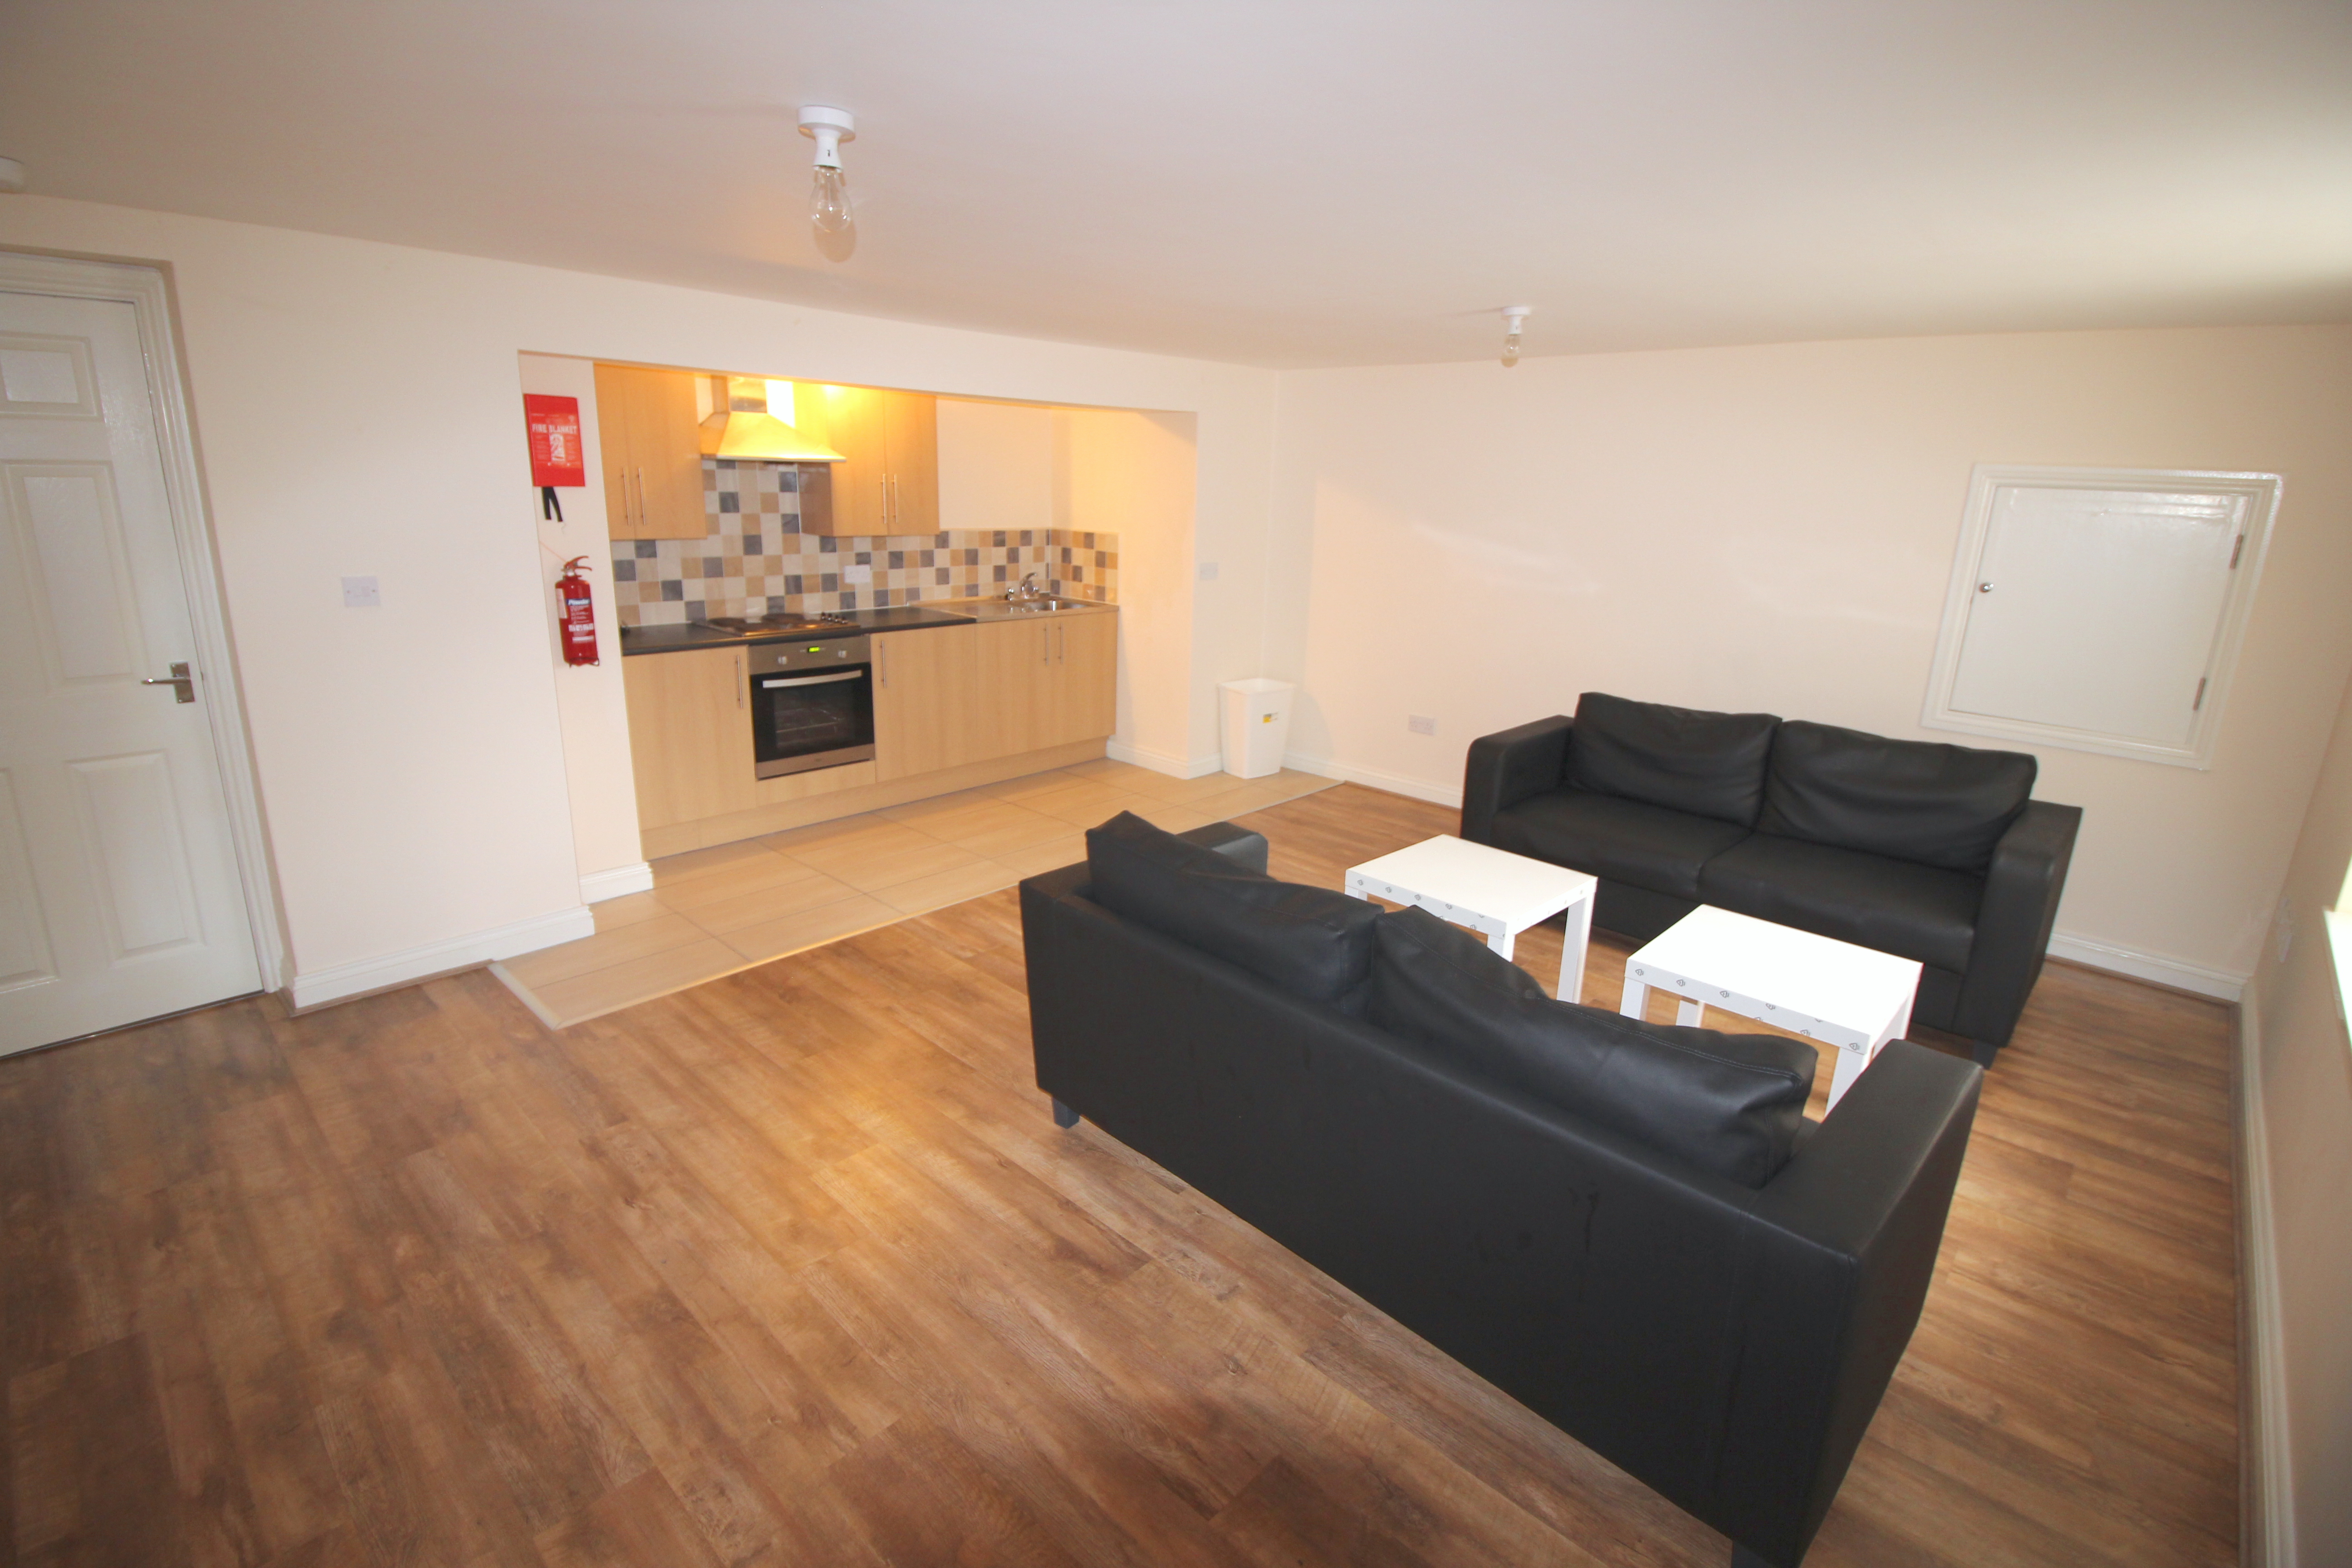 8 Bed Student House, Victoria Street NE4 £104.00 PPPW